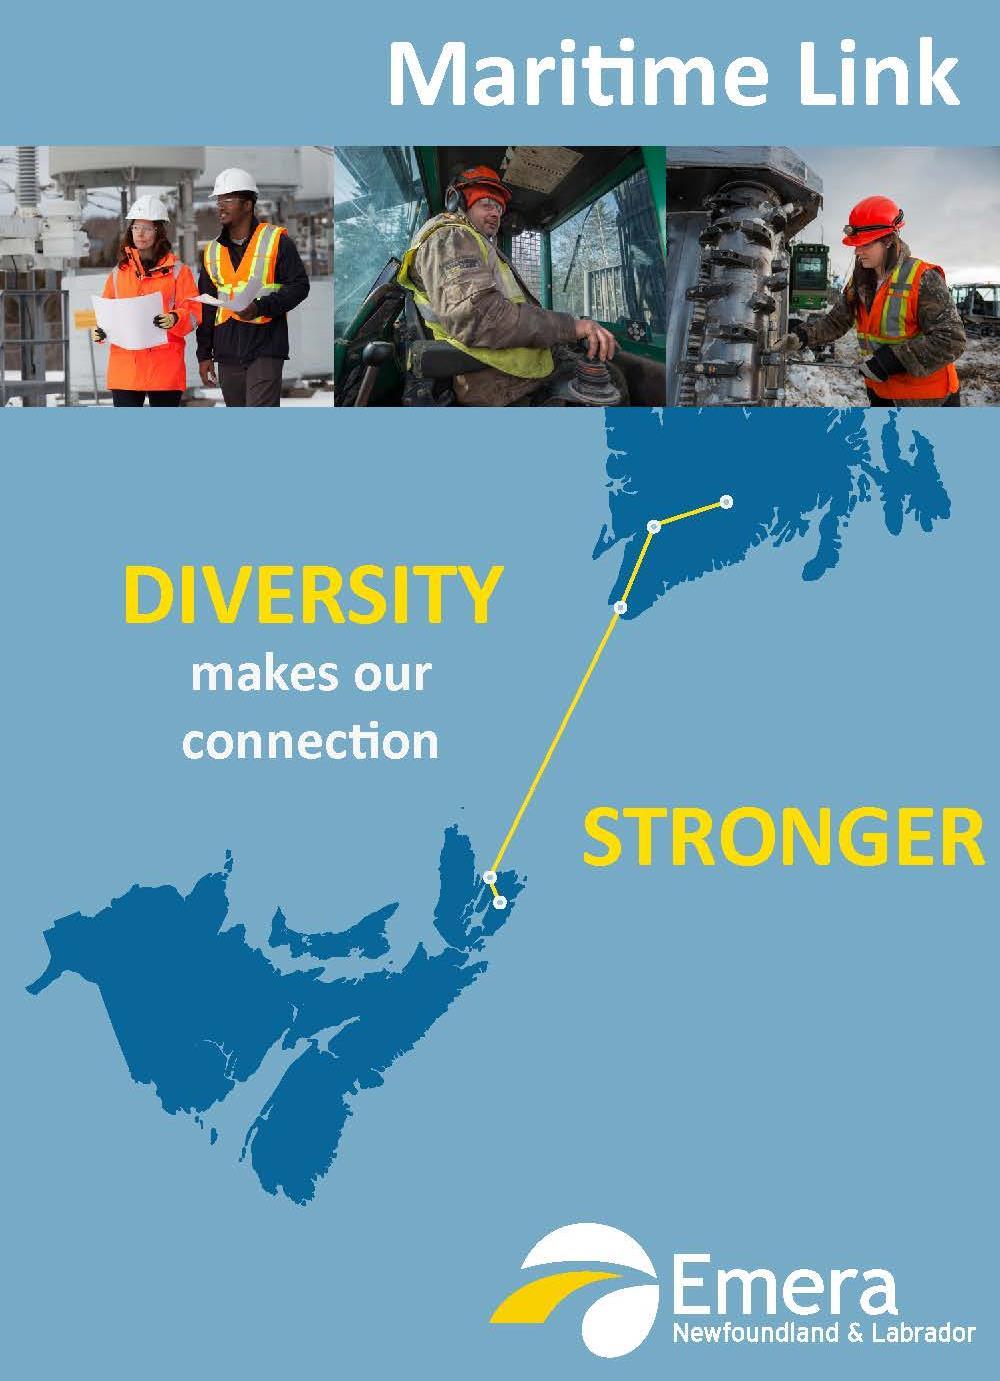 Gender Equity and Diversity Emera Newfoundland & Labrador has developed a Diversity Plan specific to the Maritime